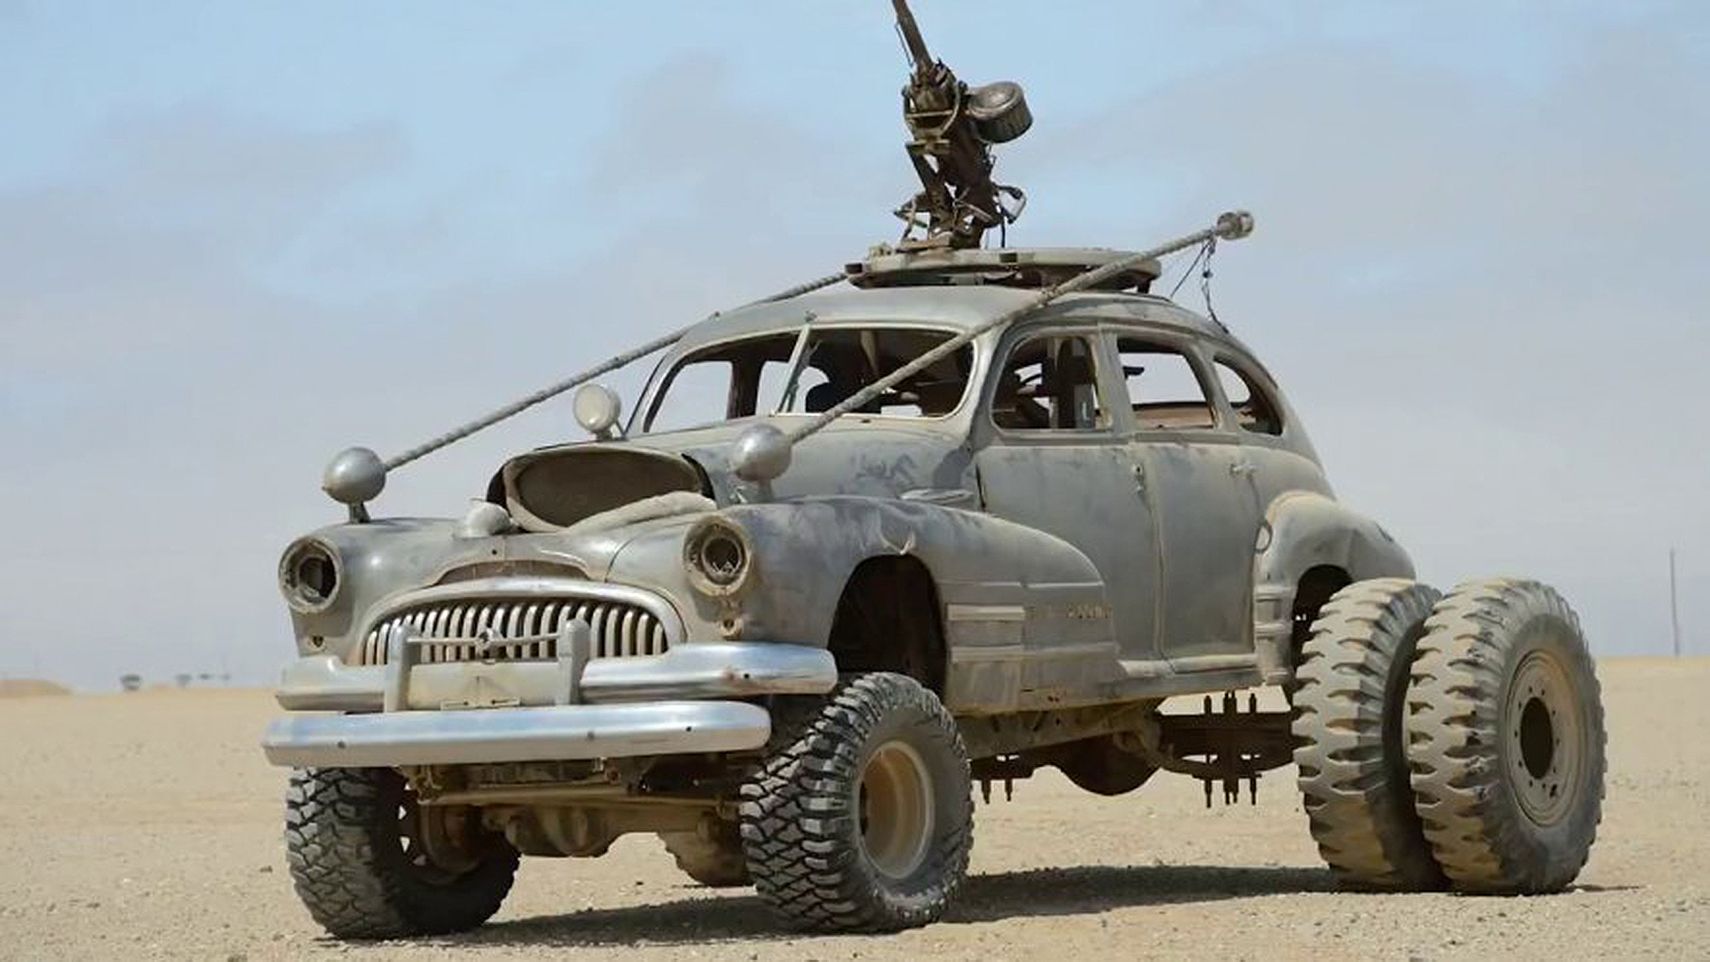 The “Buick” That Protects Immortan Joe